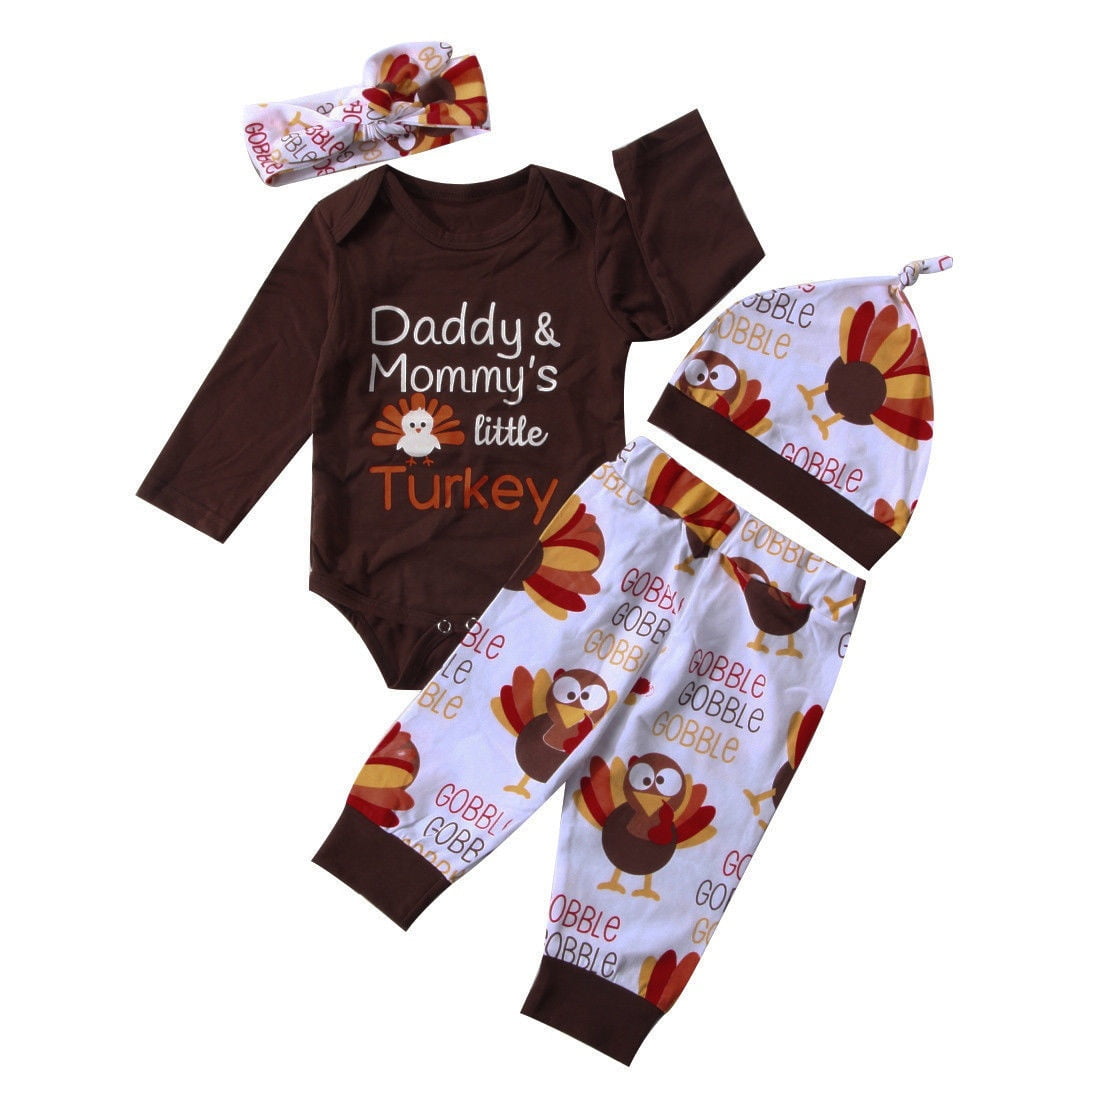 NEW Thanksgiving Daddys little Turkey Baby Boys Bodysuit Hat Booties Outfit Set 